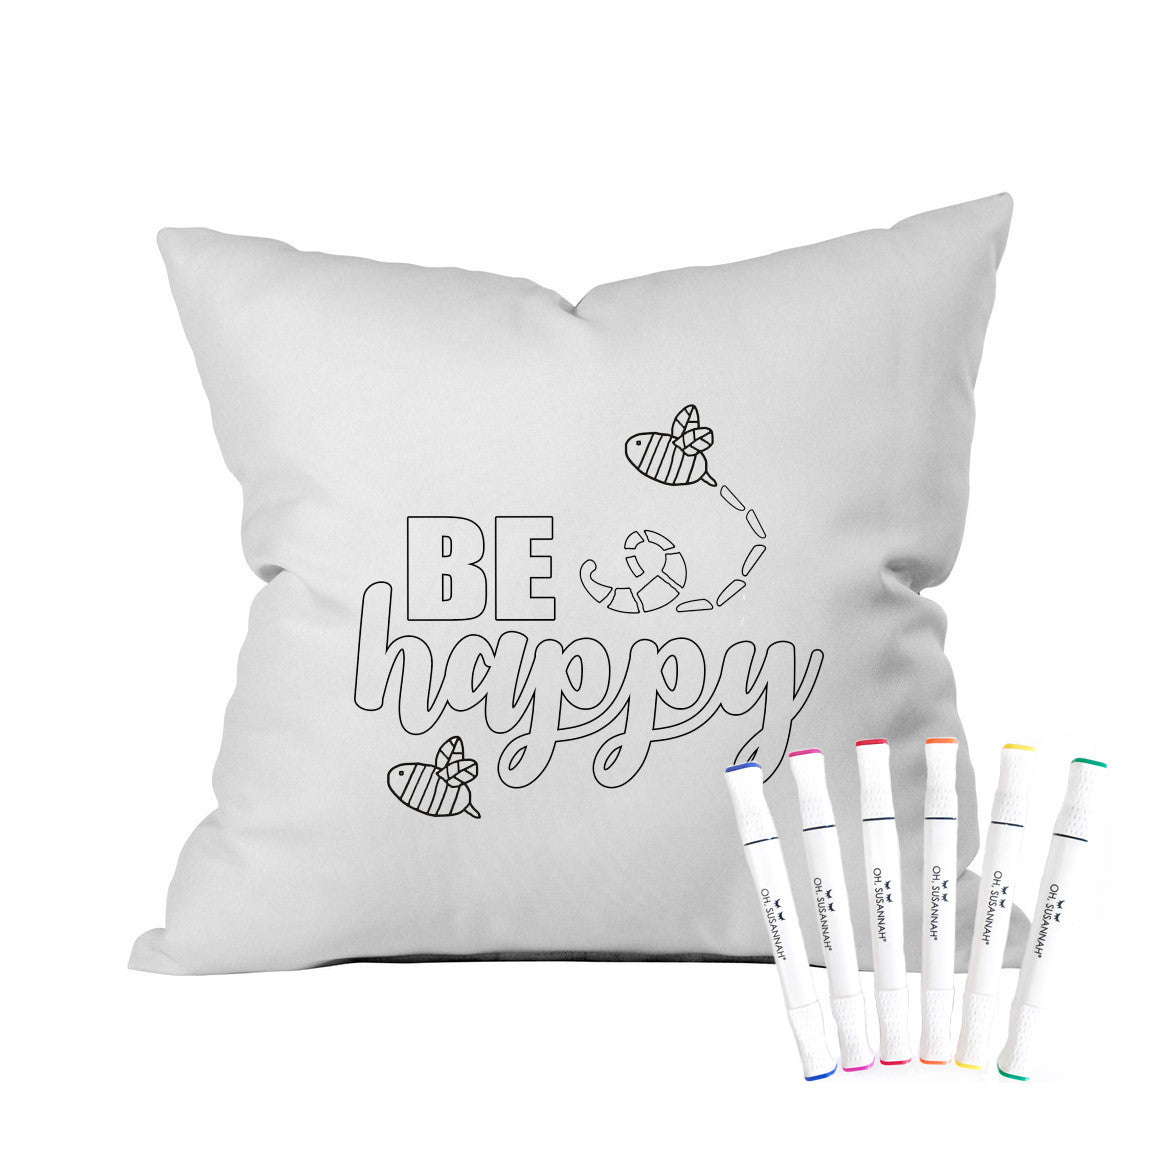 Colorable "Be Happy" Pillowcase With Markers (18x18")